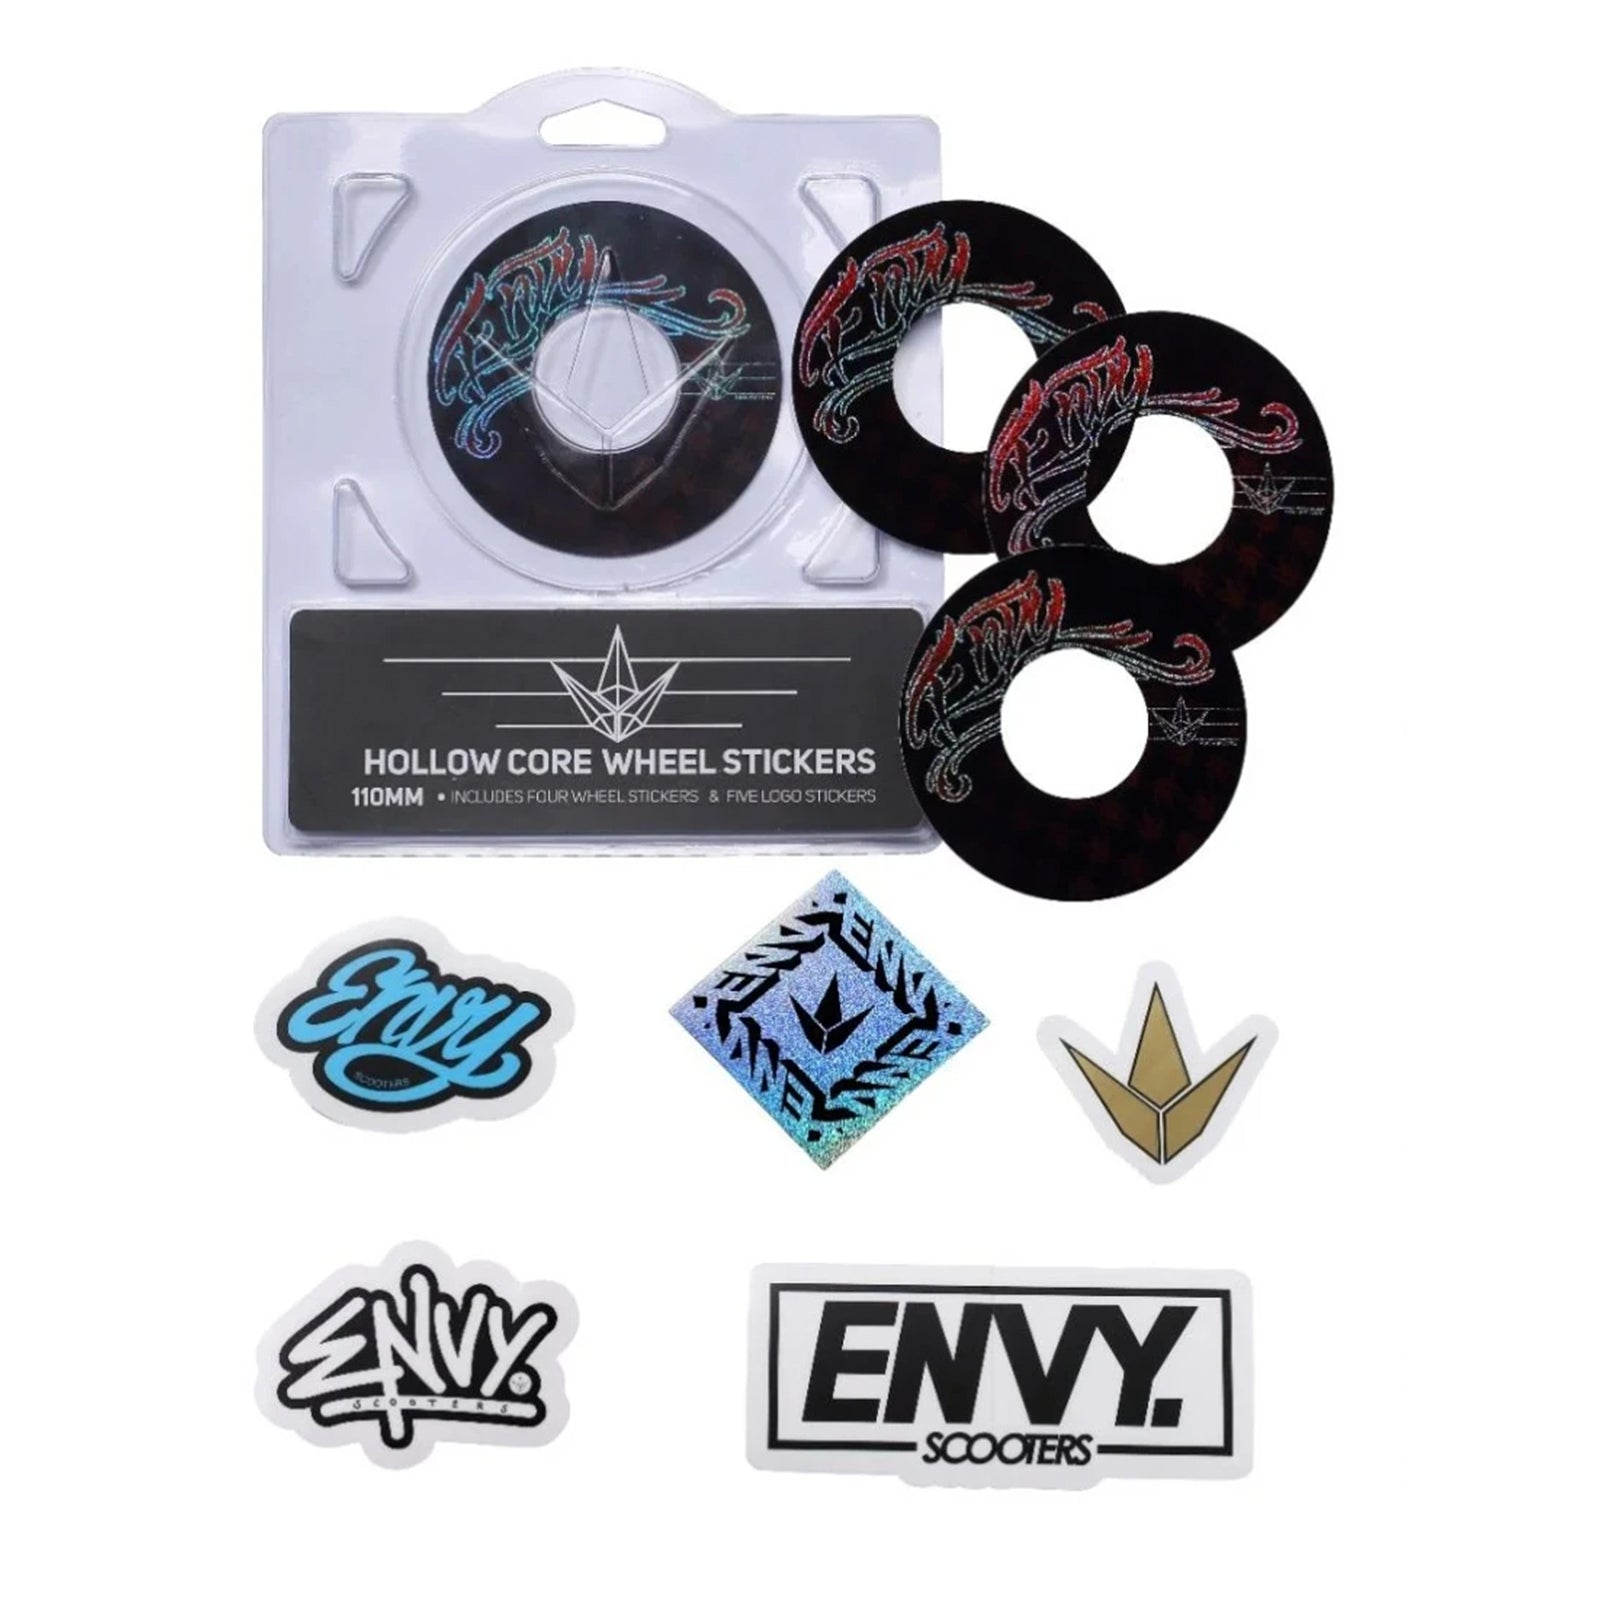 Envy Hollow Core Wheel Stickers, 110mm Wheel Stickers (Various Designs)